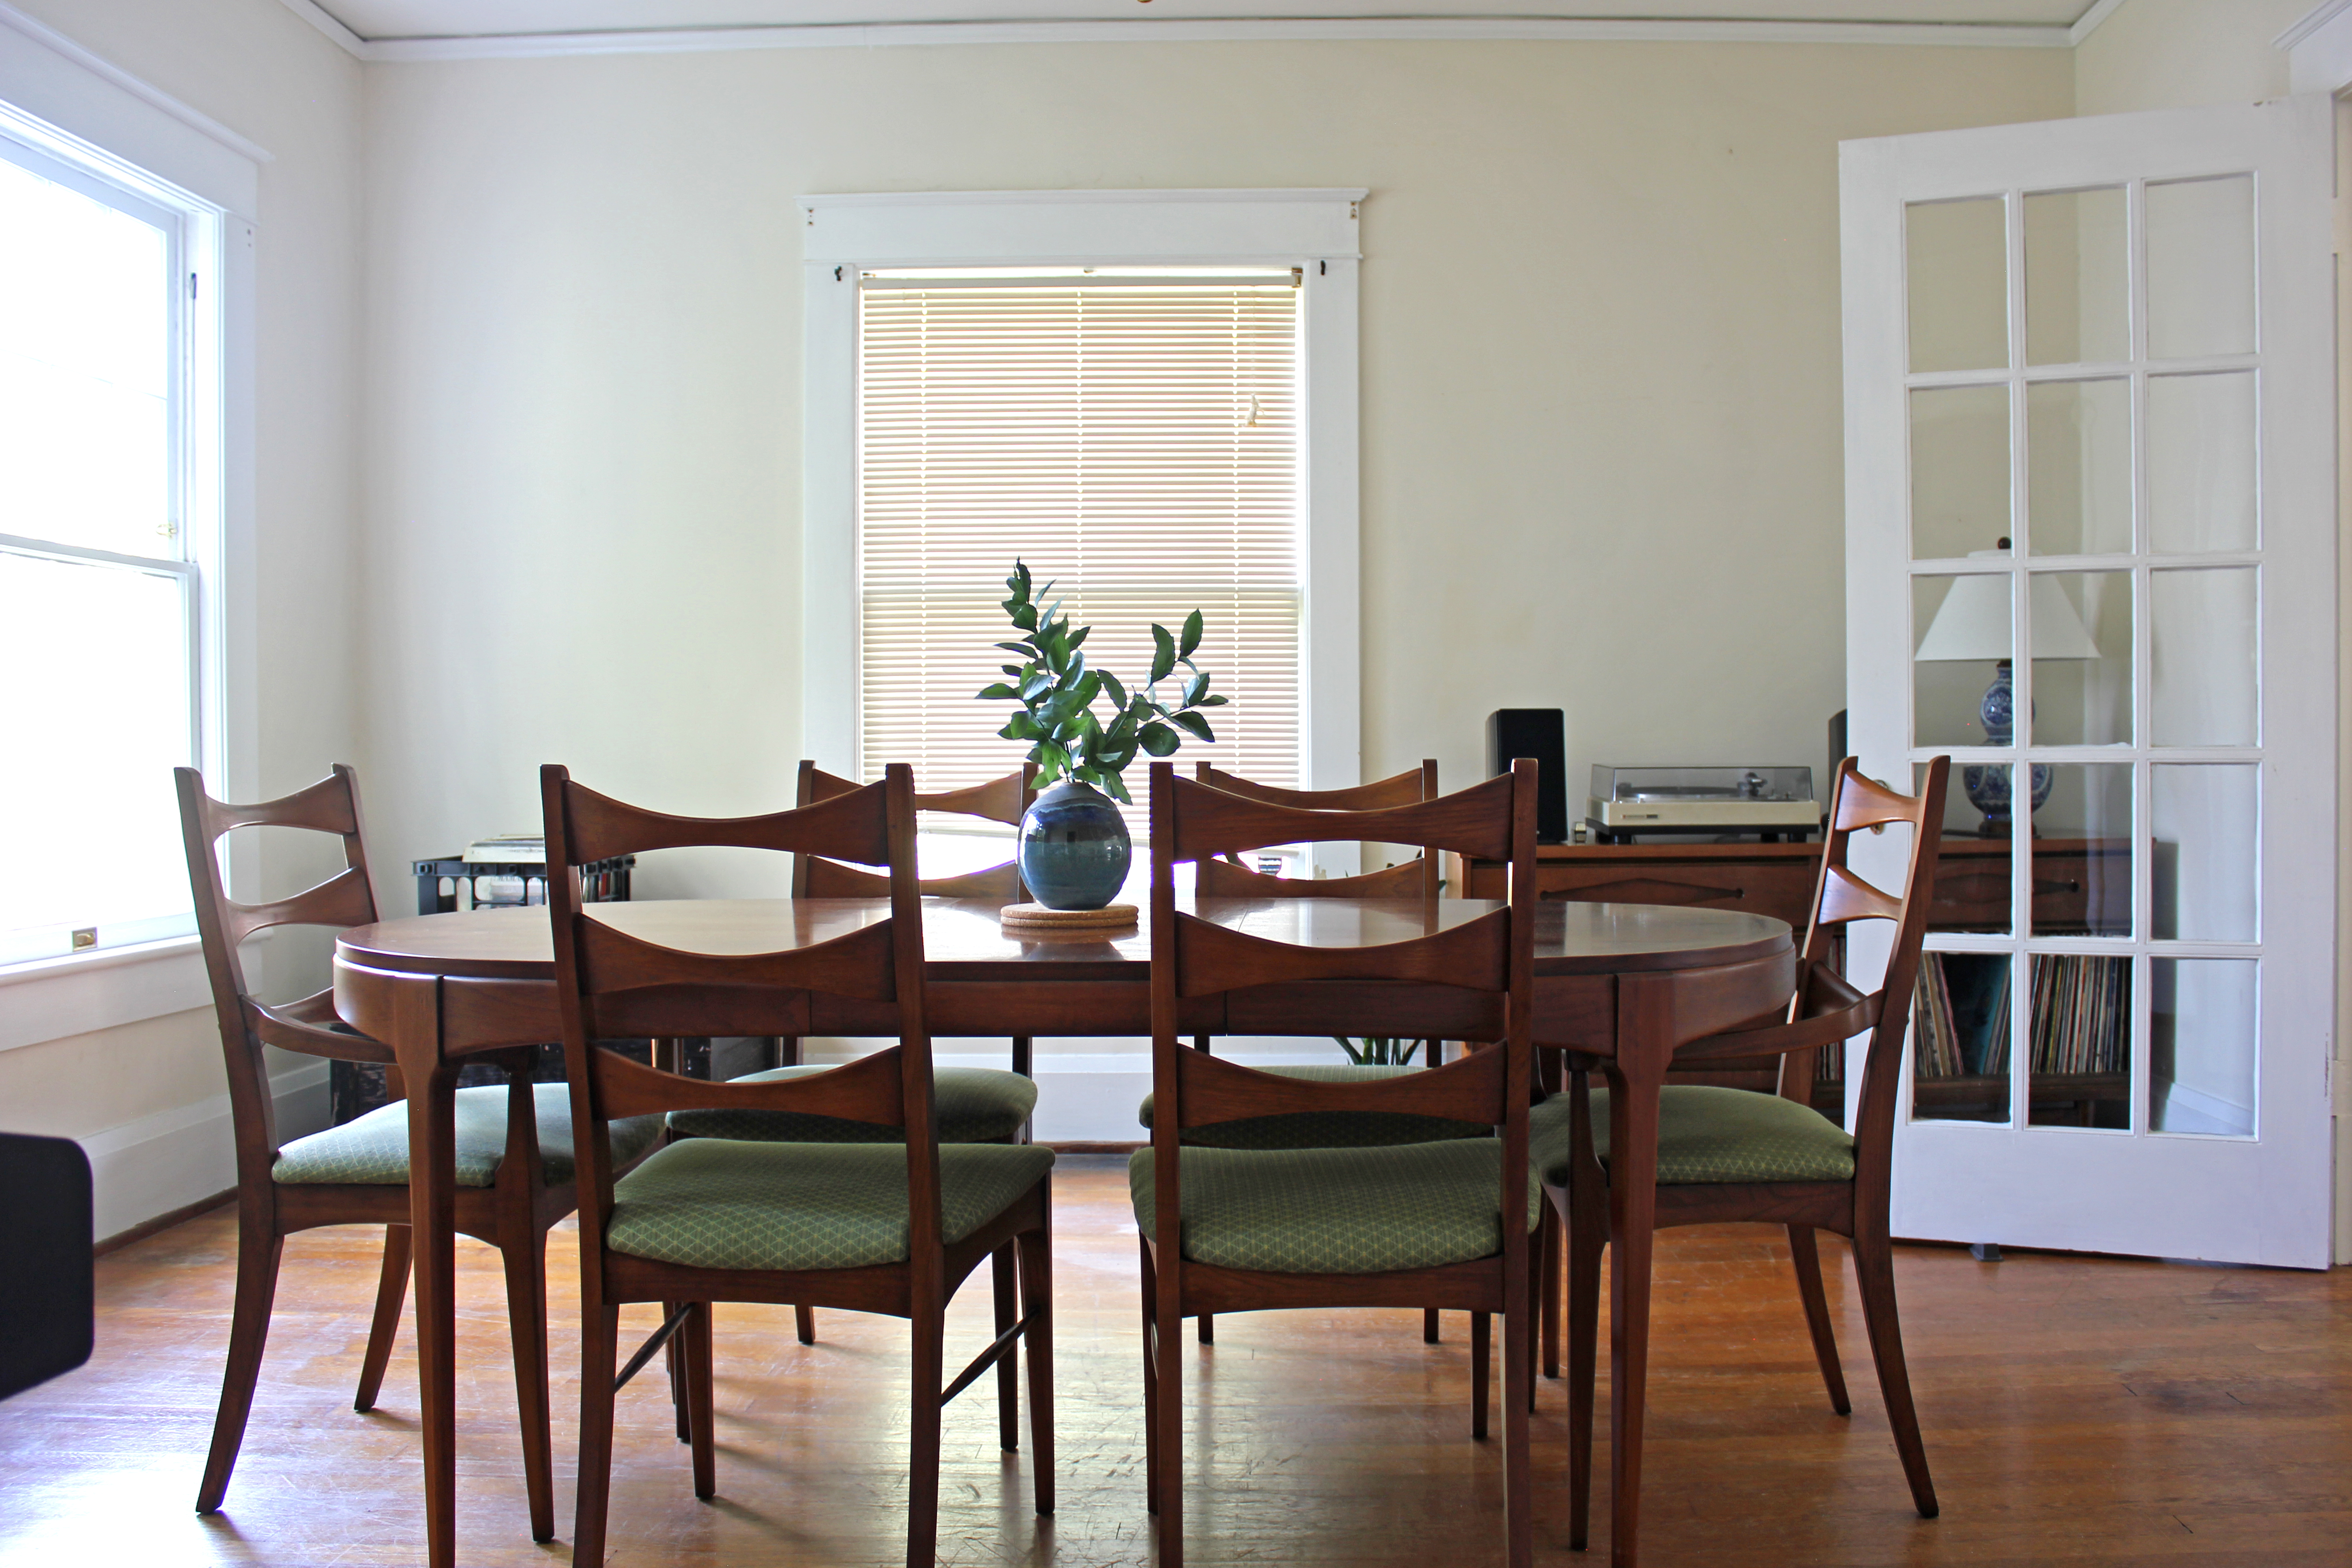 Dining room with furniture